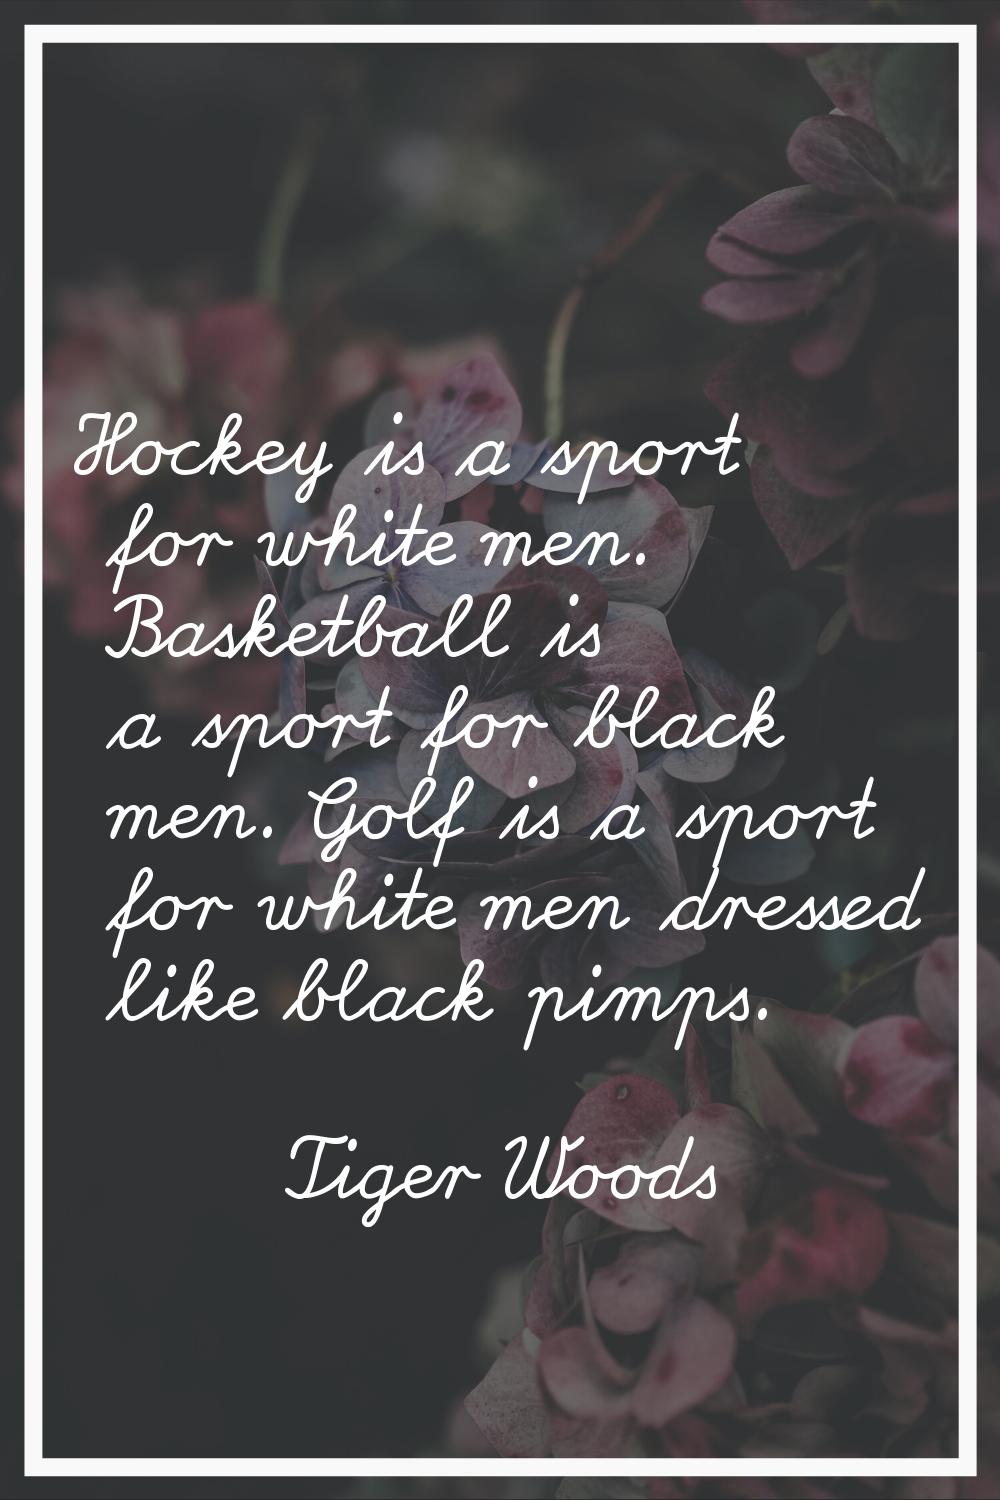 Hockey is a sport for white men. Basketball is a sport for black men. Golf is a sport for white men